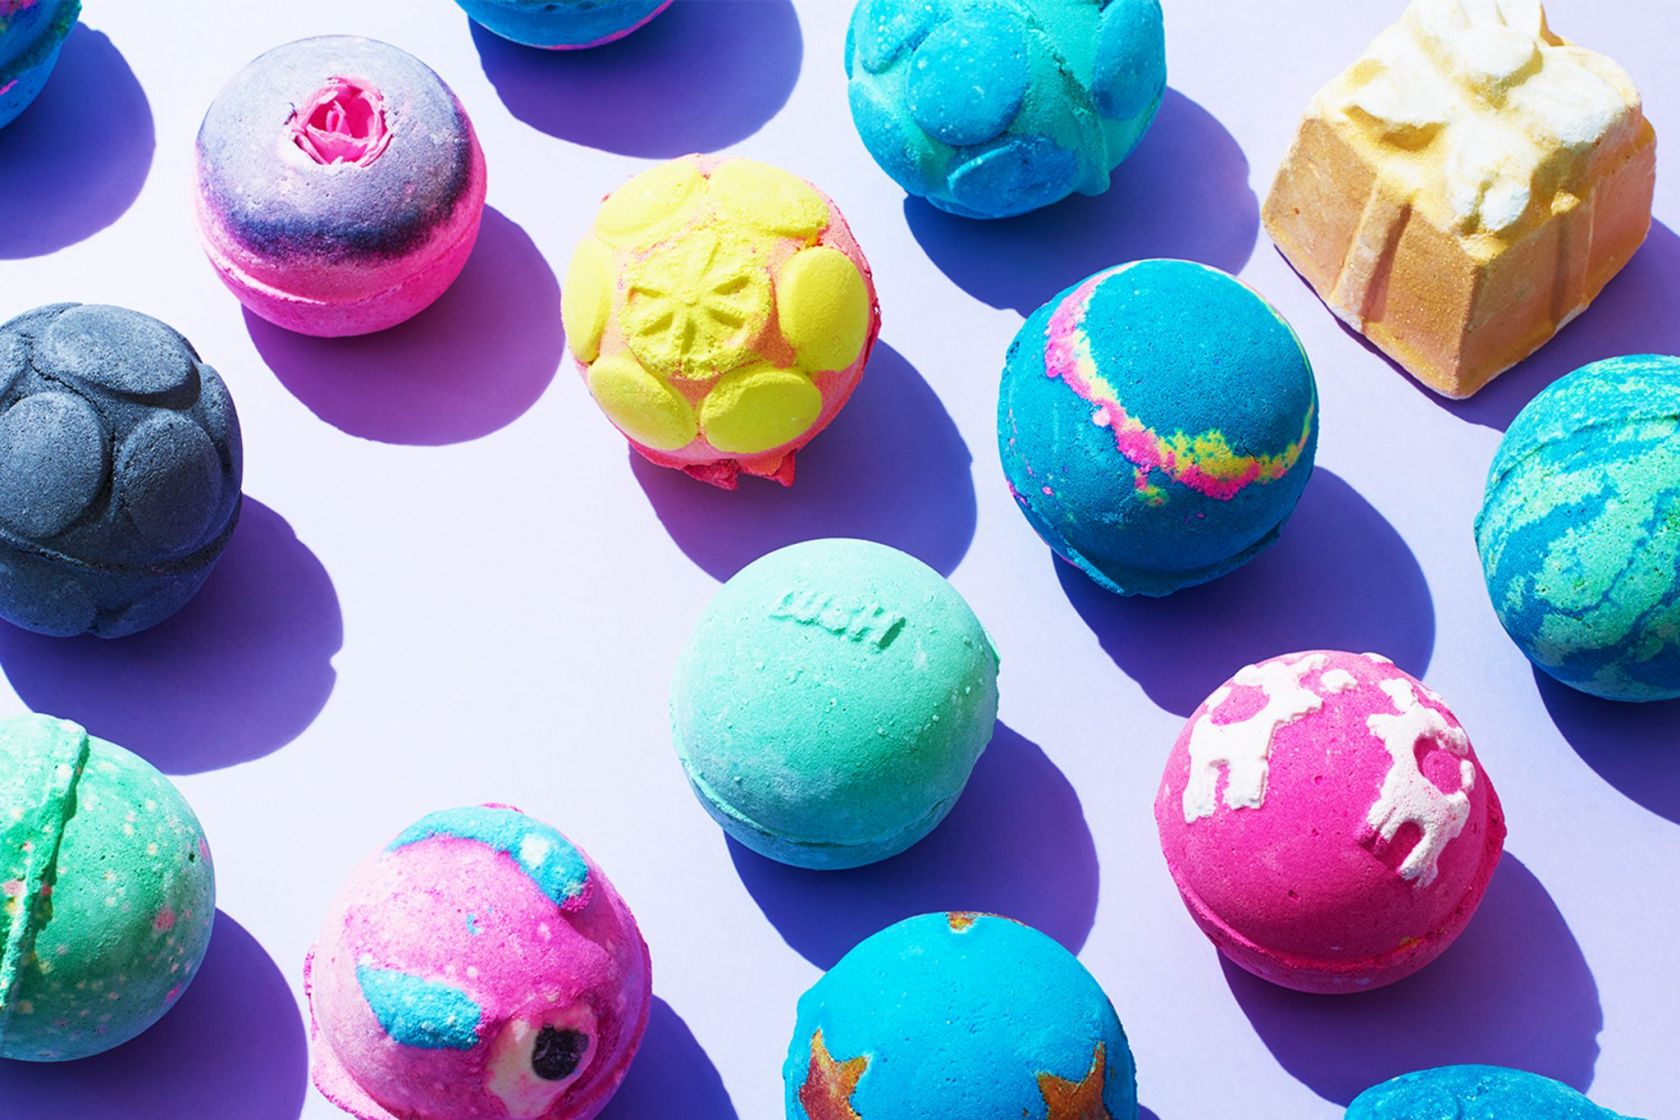 Lush is discontinuing over 100 of its 